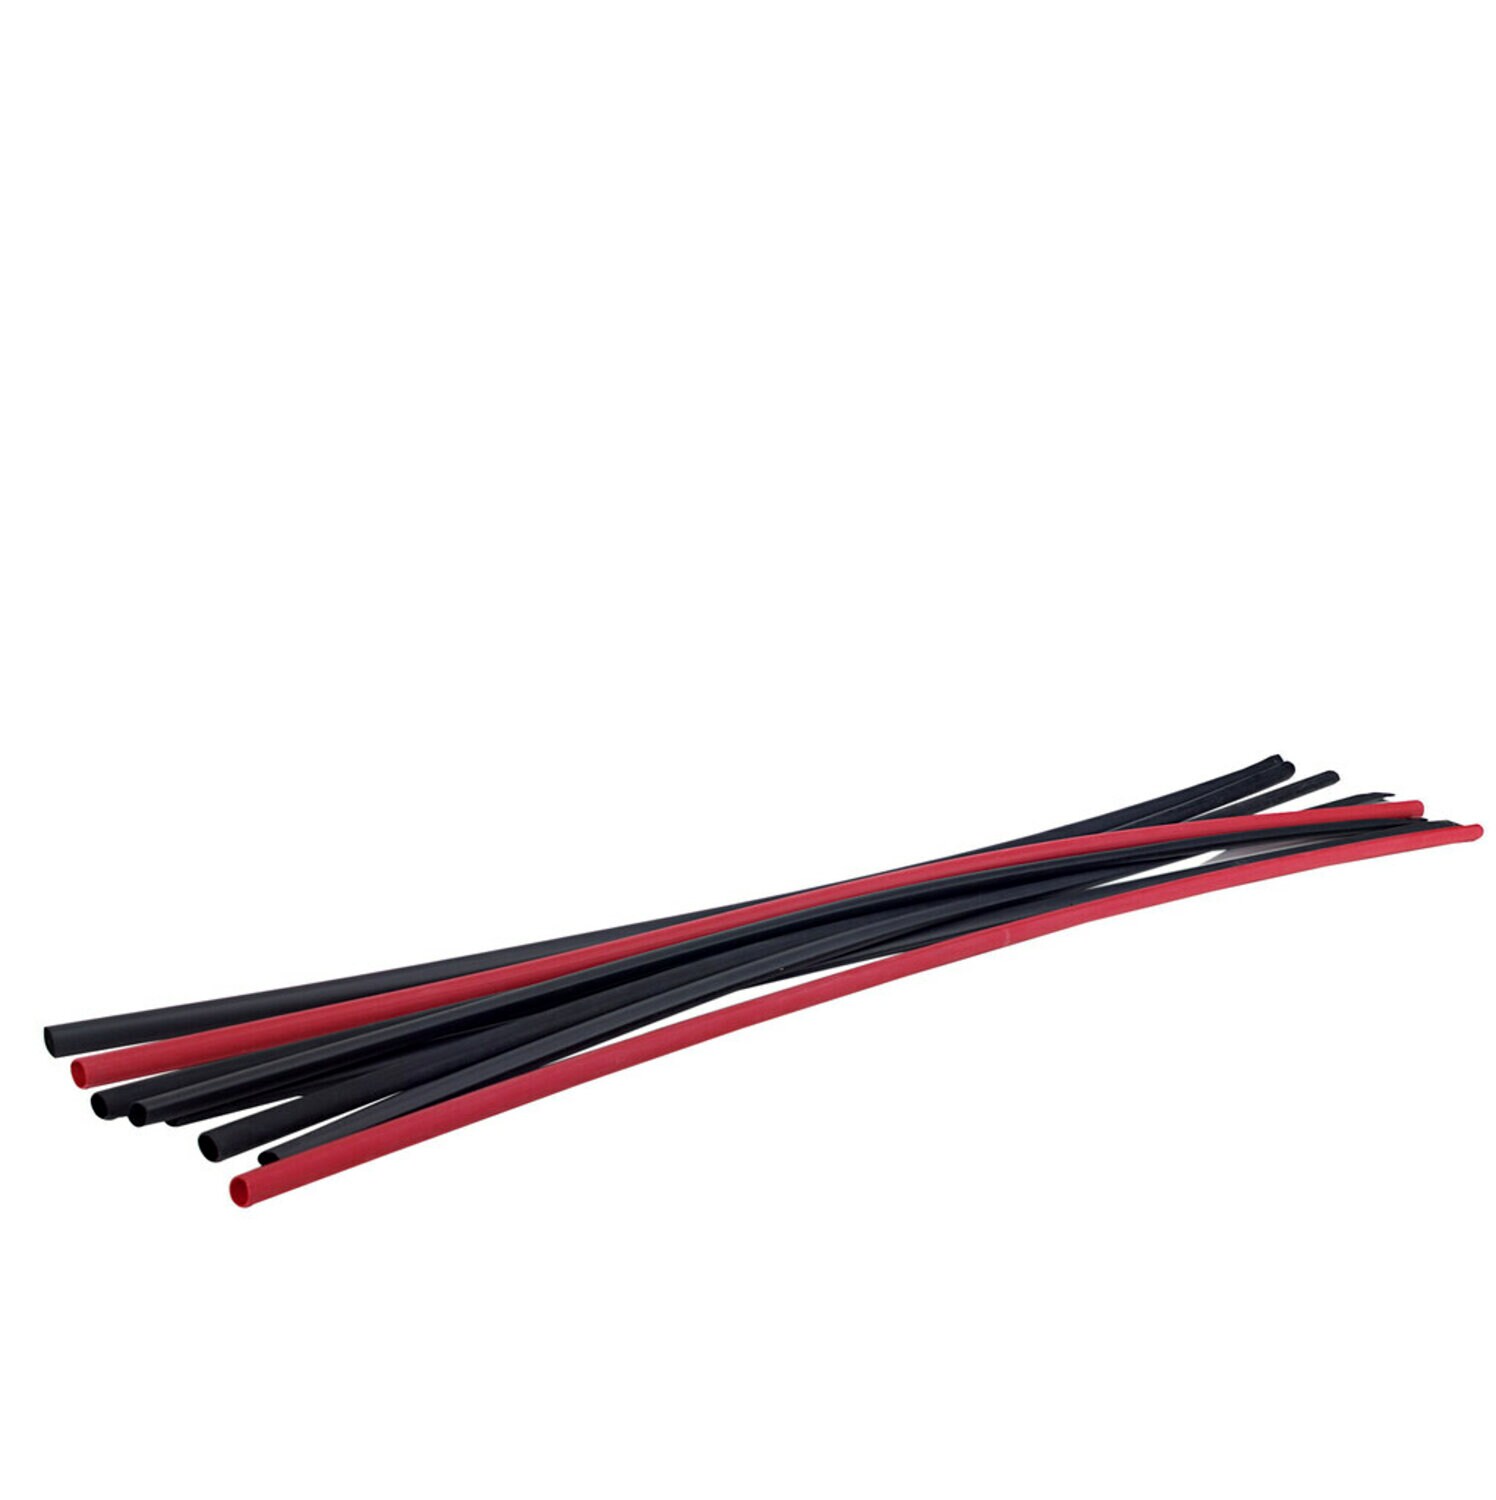 7010400831 - 3M Heat Shrink Thin-Wall Tubing FP-301-3/64-48"-Red-250 Pcs, 48 in
Length sticks, 250 pieces/case